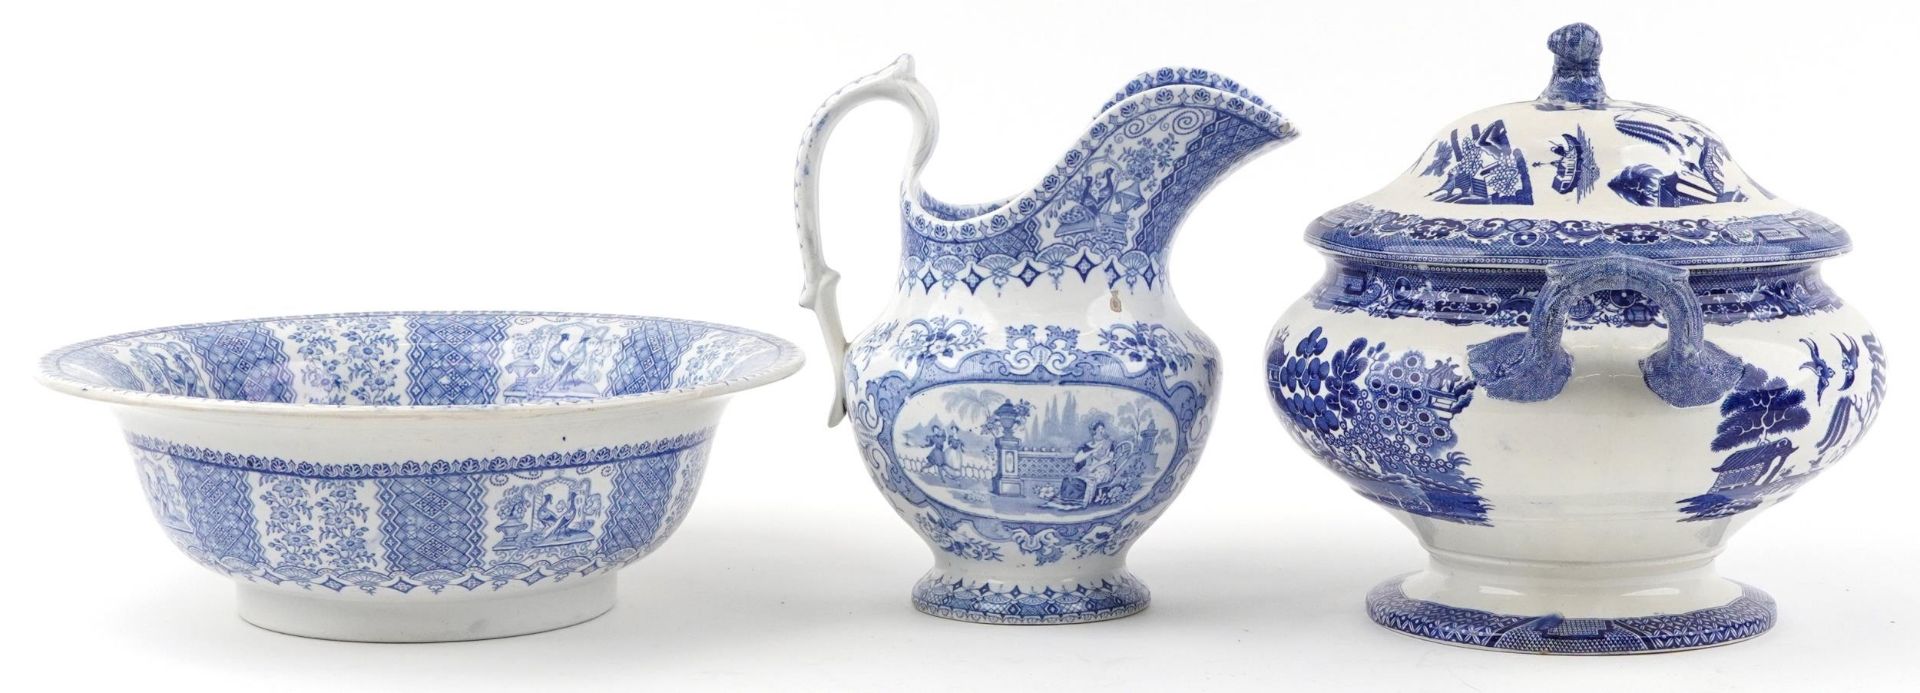 Victorian blue and white wash jug and basin, transfer printed in the Tyrolienne pattern and a - Bild 7 aus 10